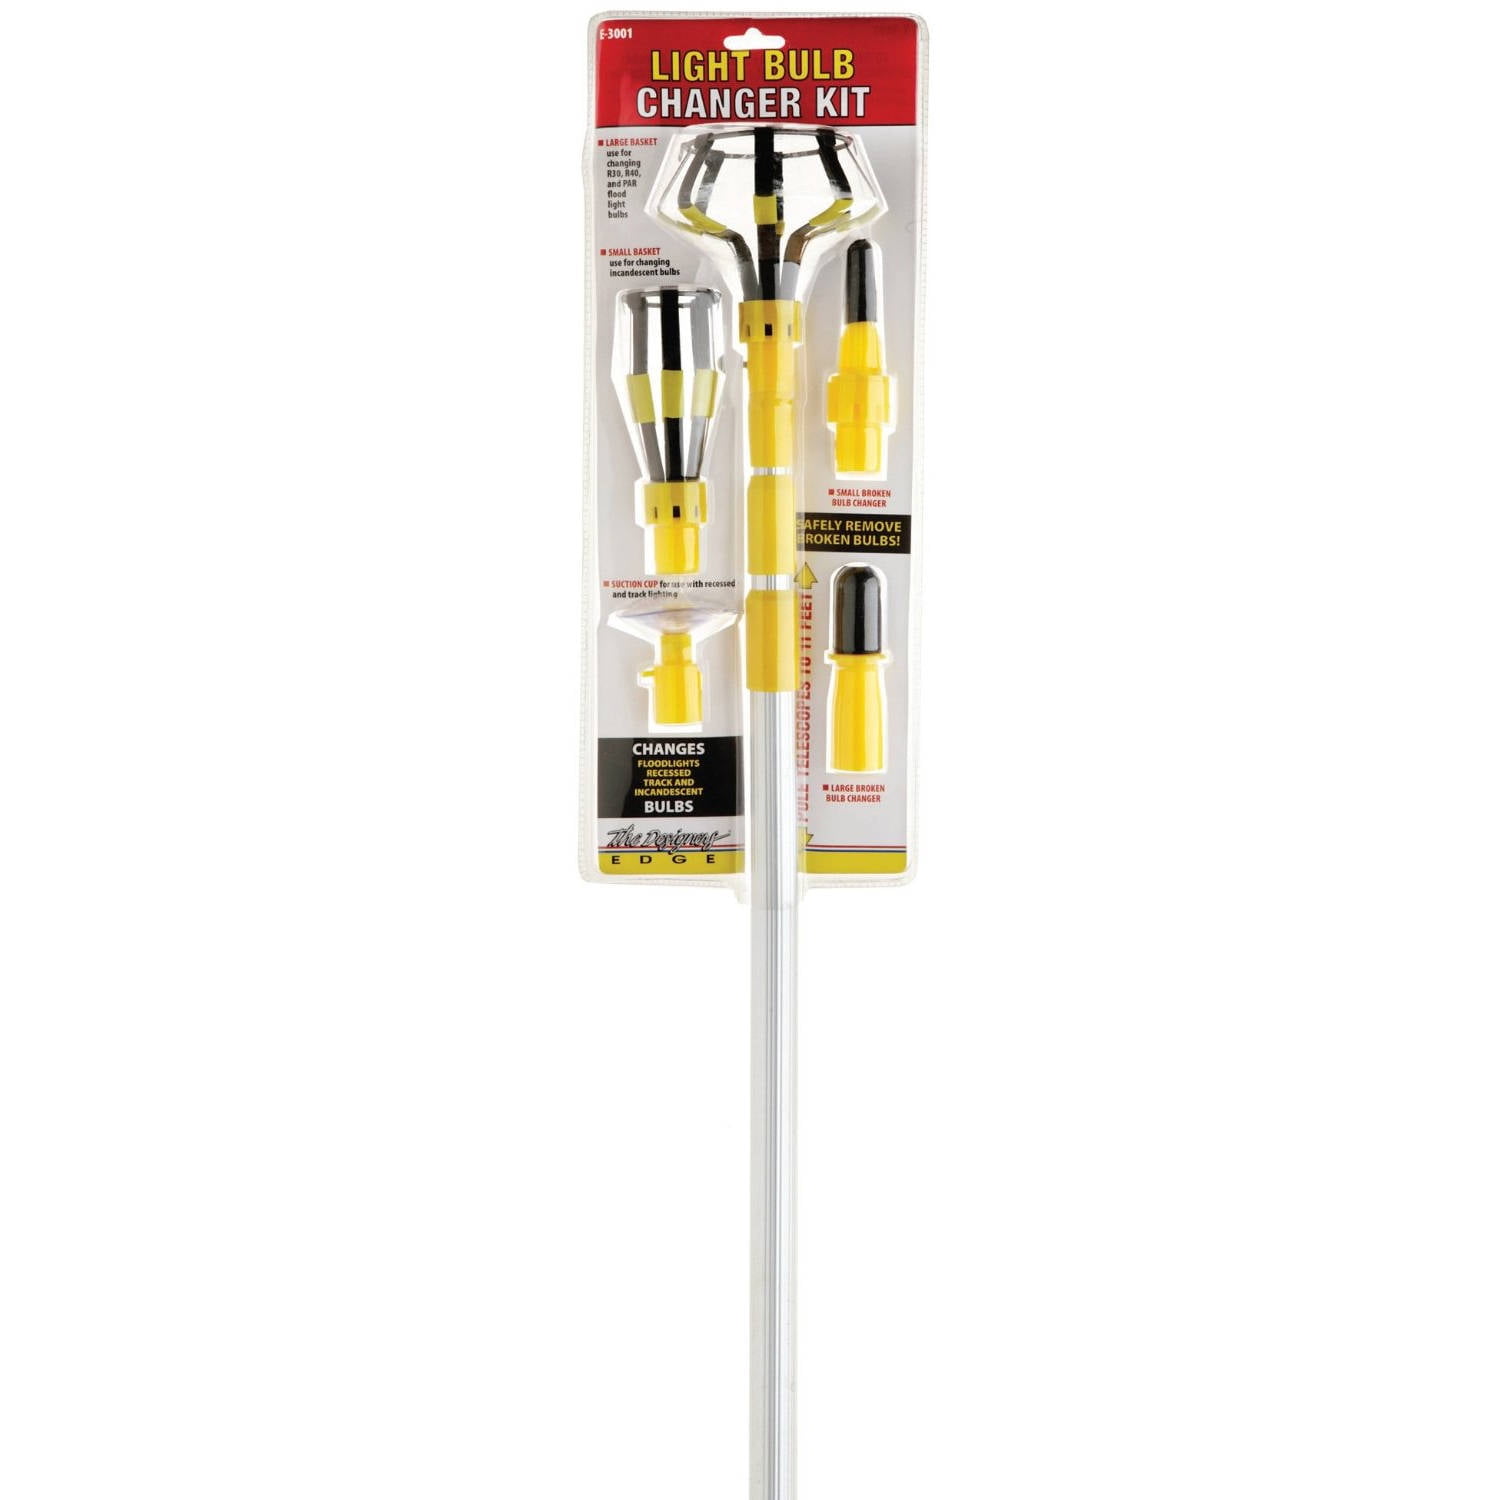 Photo 1 of Designers Edge E3001 11' Yellow Light Changing Kit Foot Metal Telescopic Pole, Baskets, Suction Cup and Broken Bulb Changers, Versatile Use, 5 Accessories Included